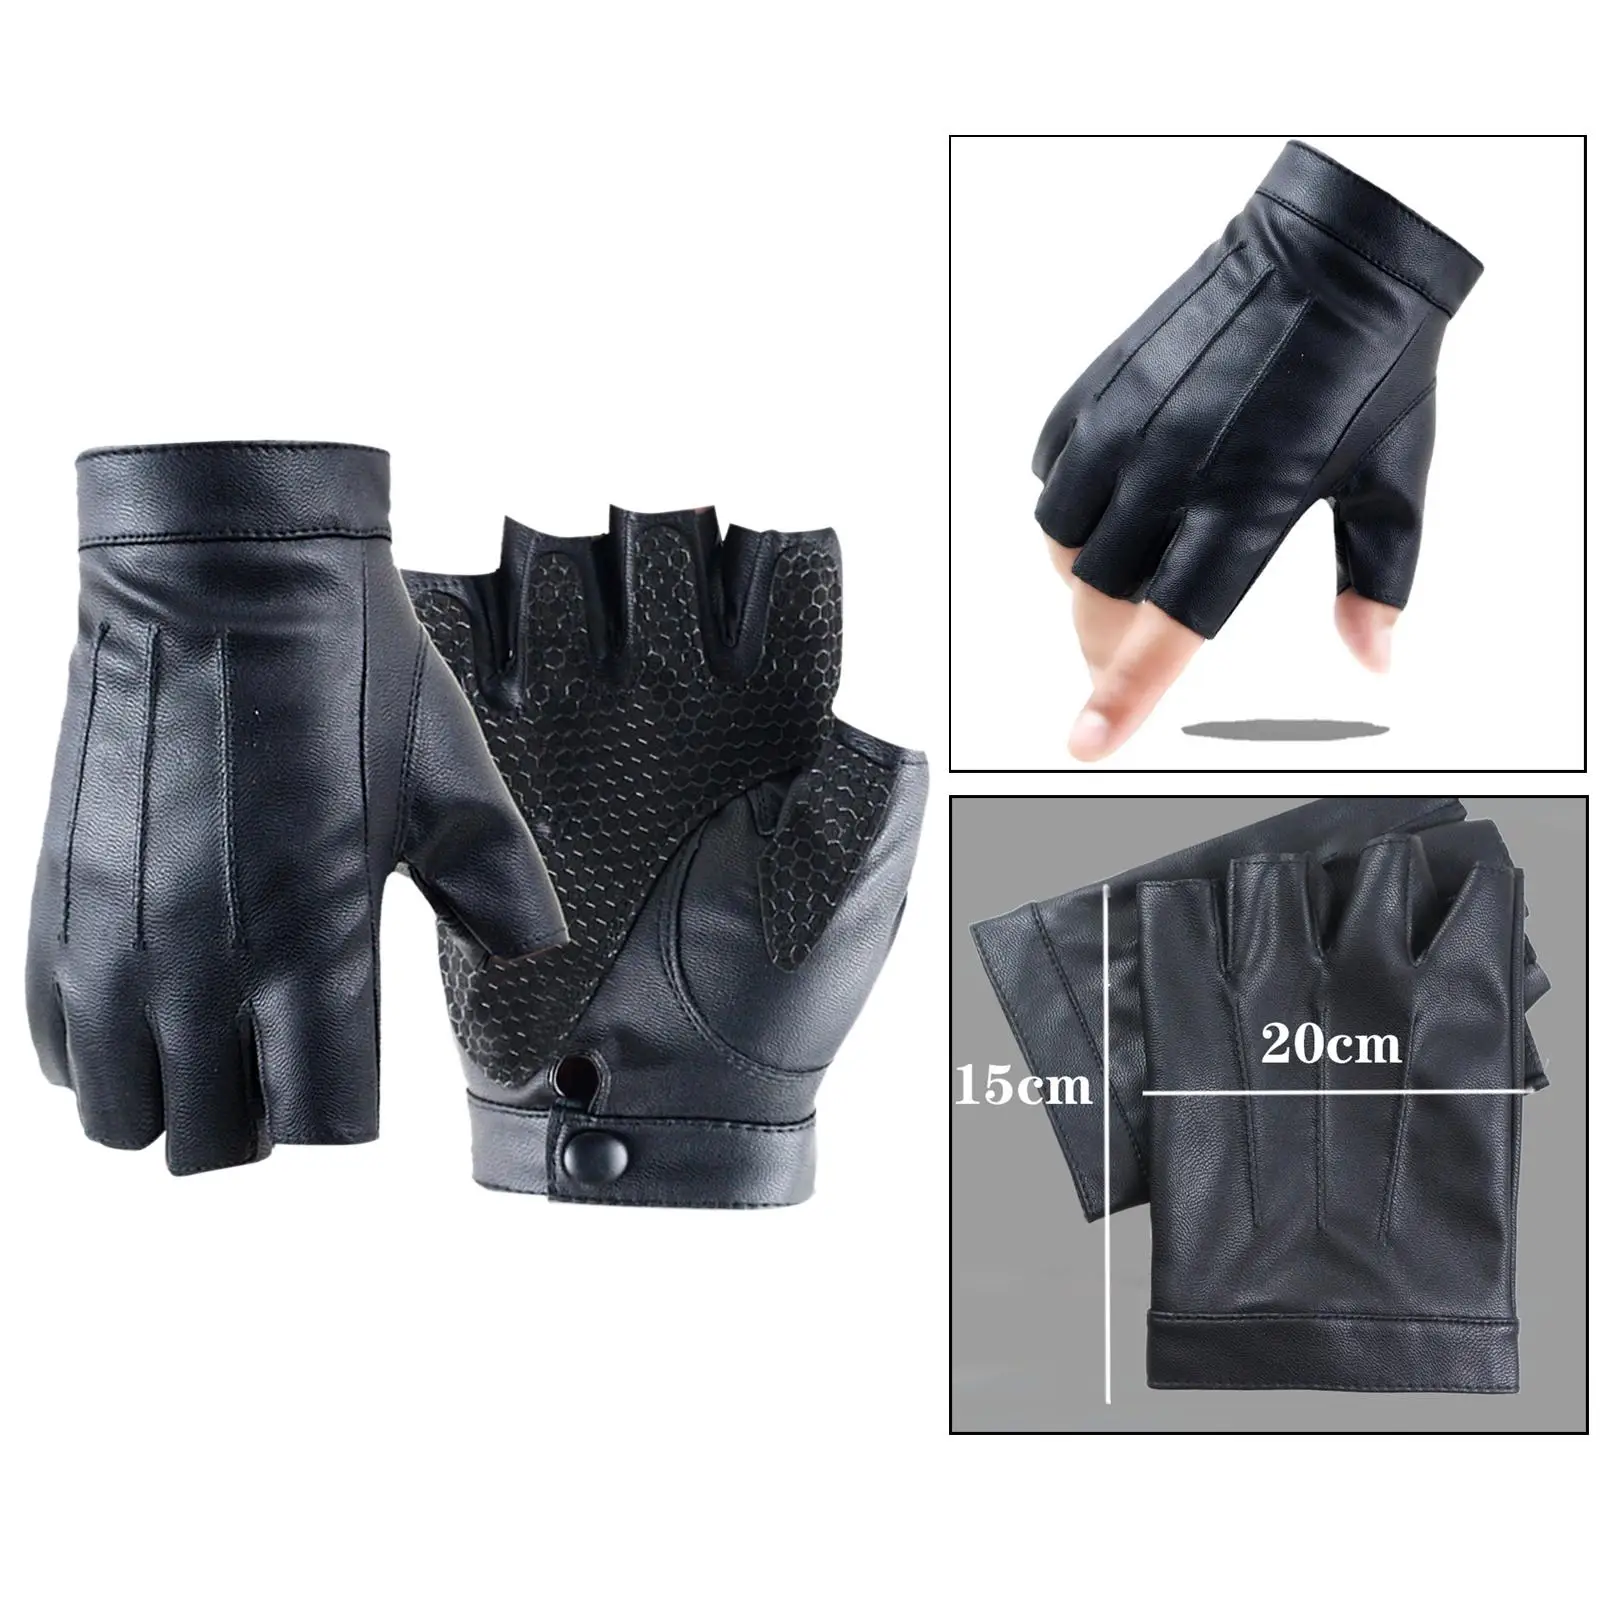 Breathable PU Leather Gloves Non Slip Palm Protection Lightweight Half Finger Gloves for Driving Running Hiking Cycling Riding